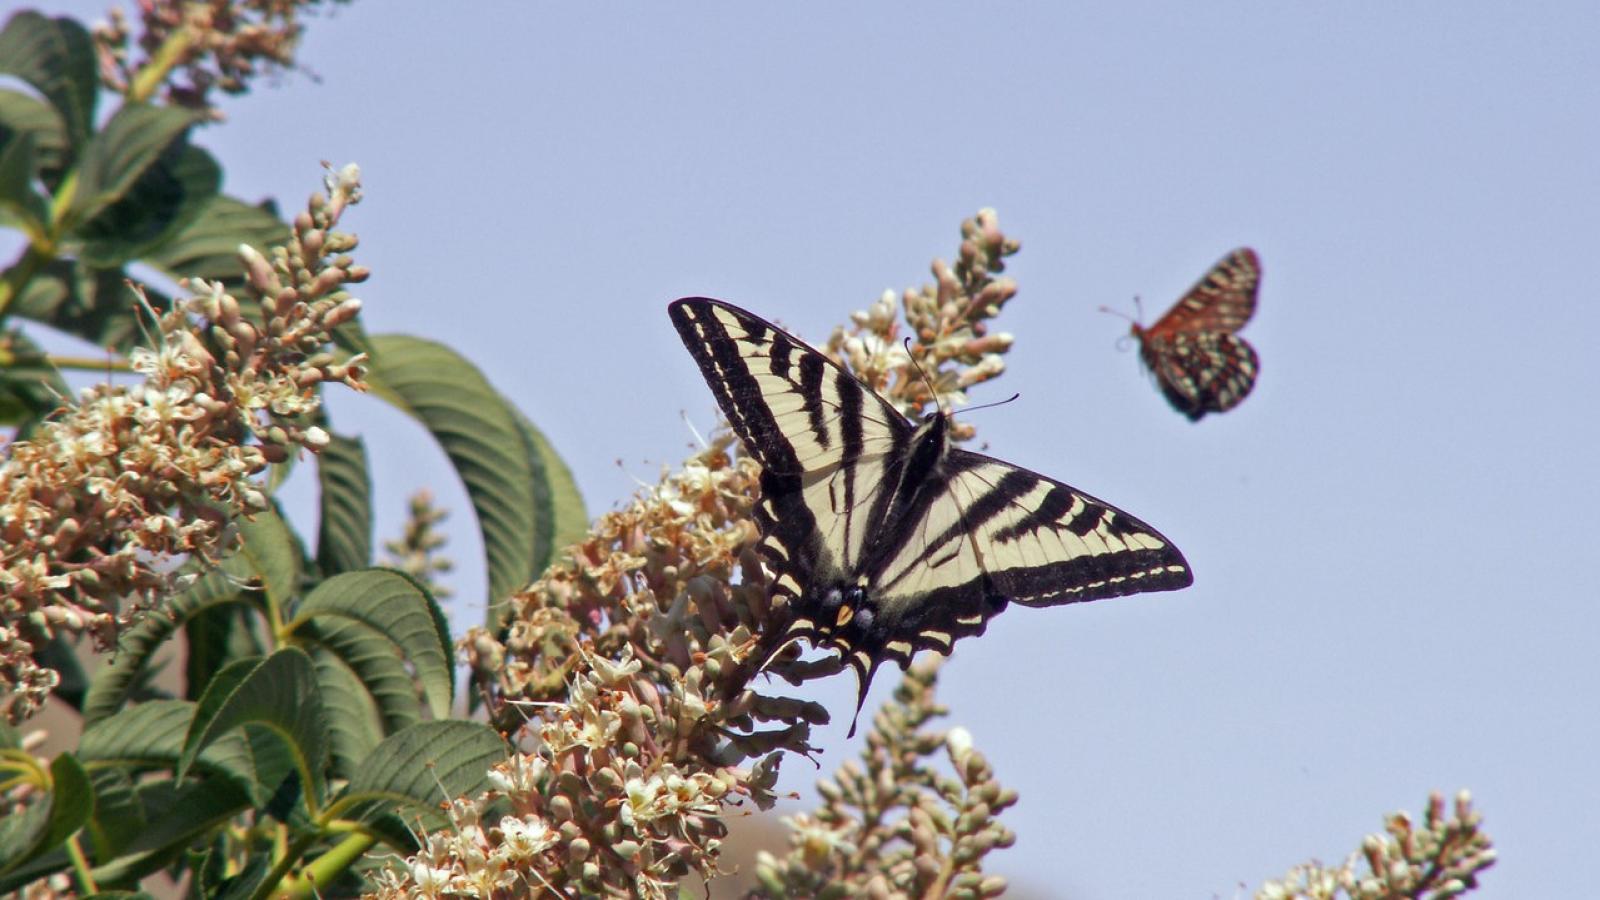 Swallowatail and Checkerspot on Buckeye. Photo by Strether Smith.